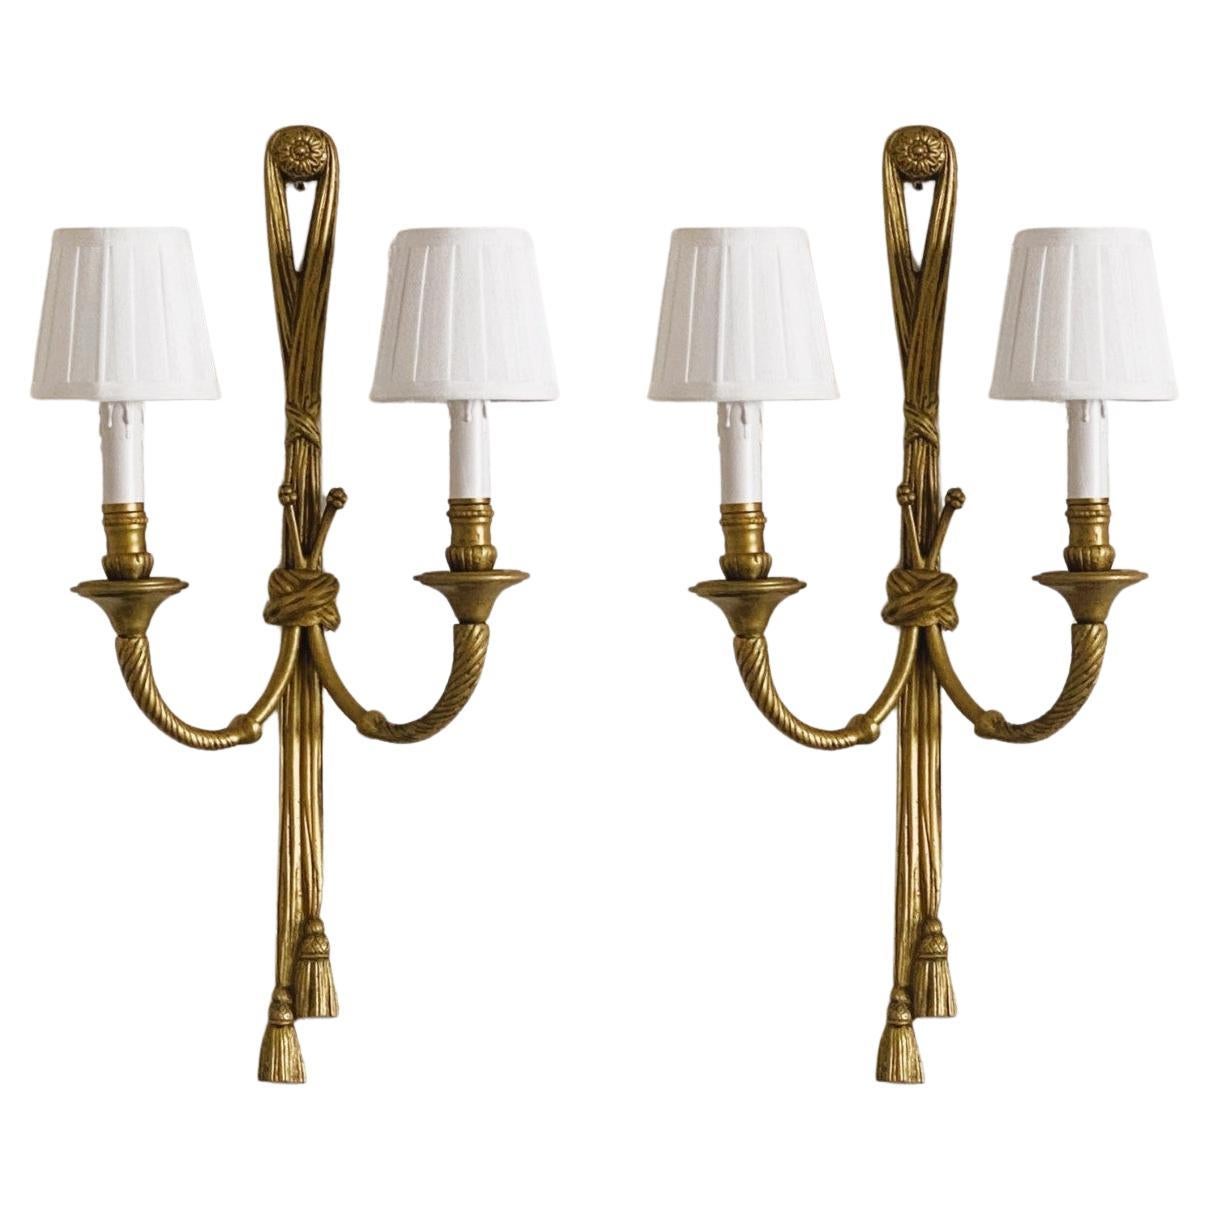 Pair of Tall French Louis XVI Gilt Bronze Electrified Wall Sconces